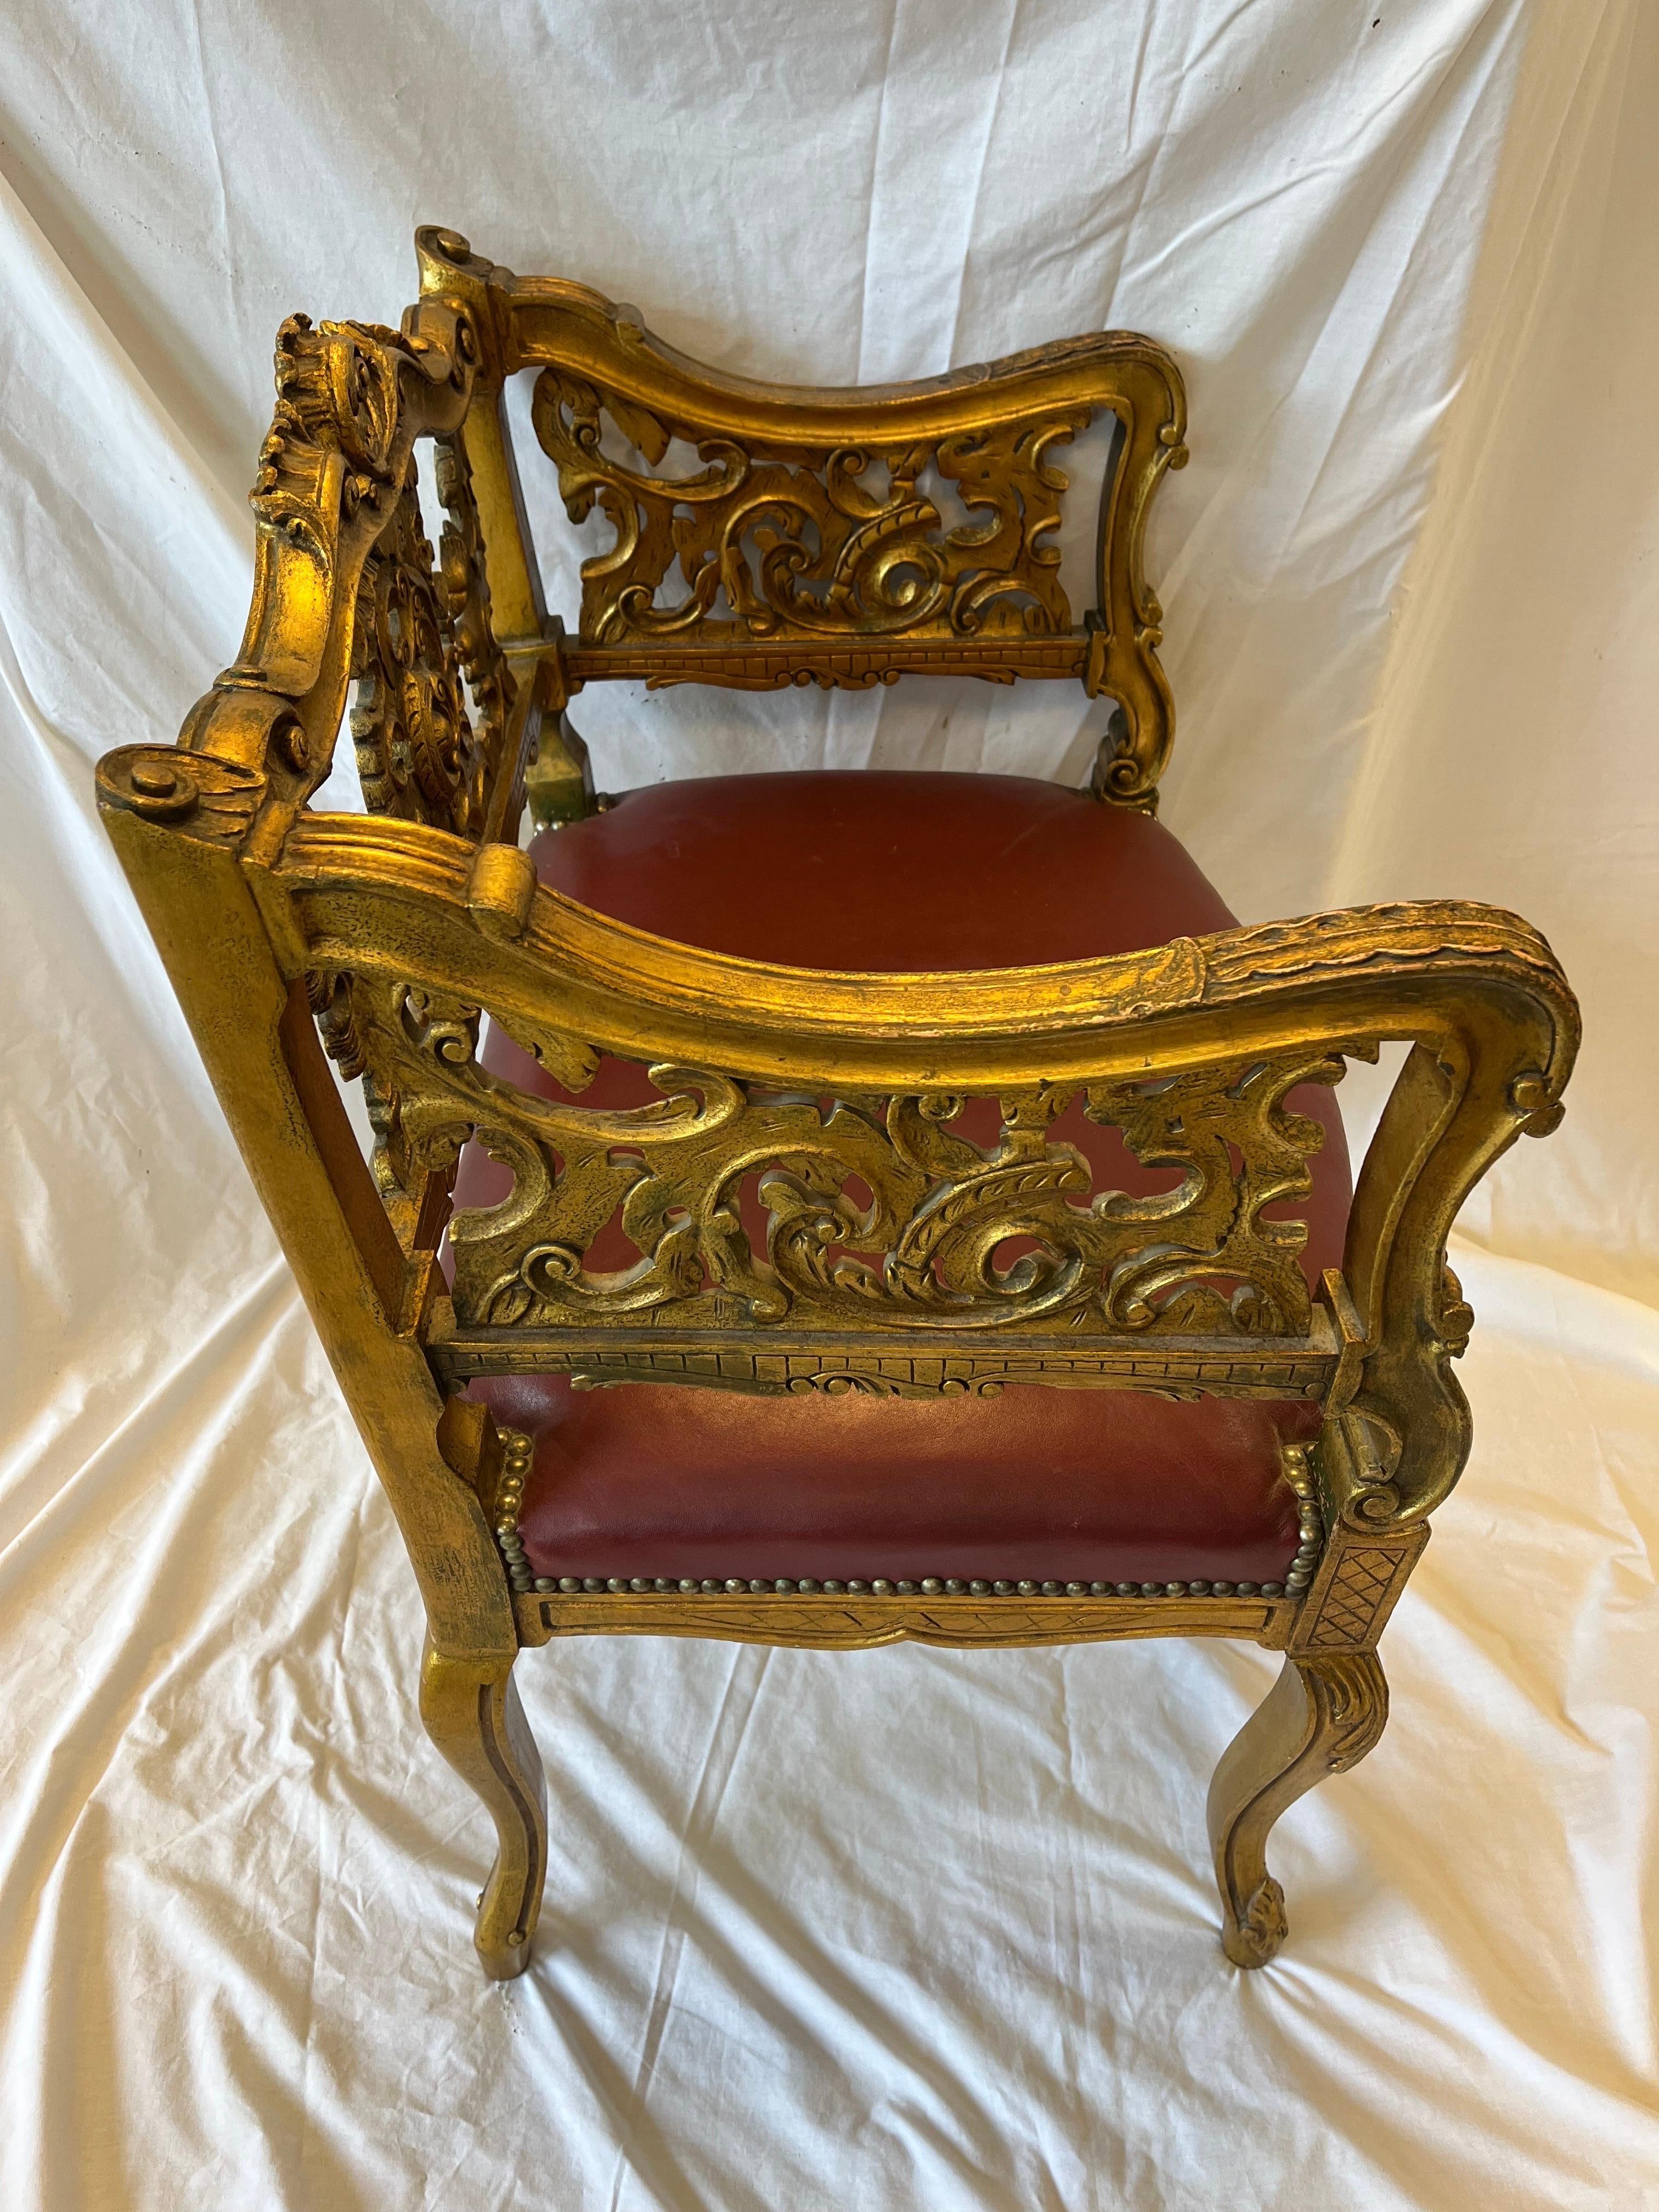 Upholstery Antique Carved and Gilt Wood Arm Chair Bench Ornate Design Red Upholstered Seat For Sale